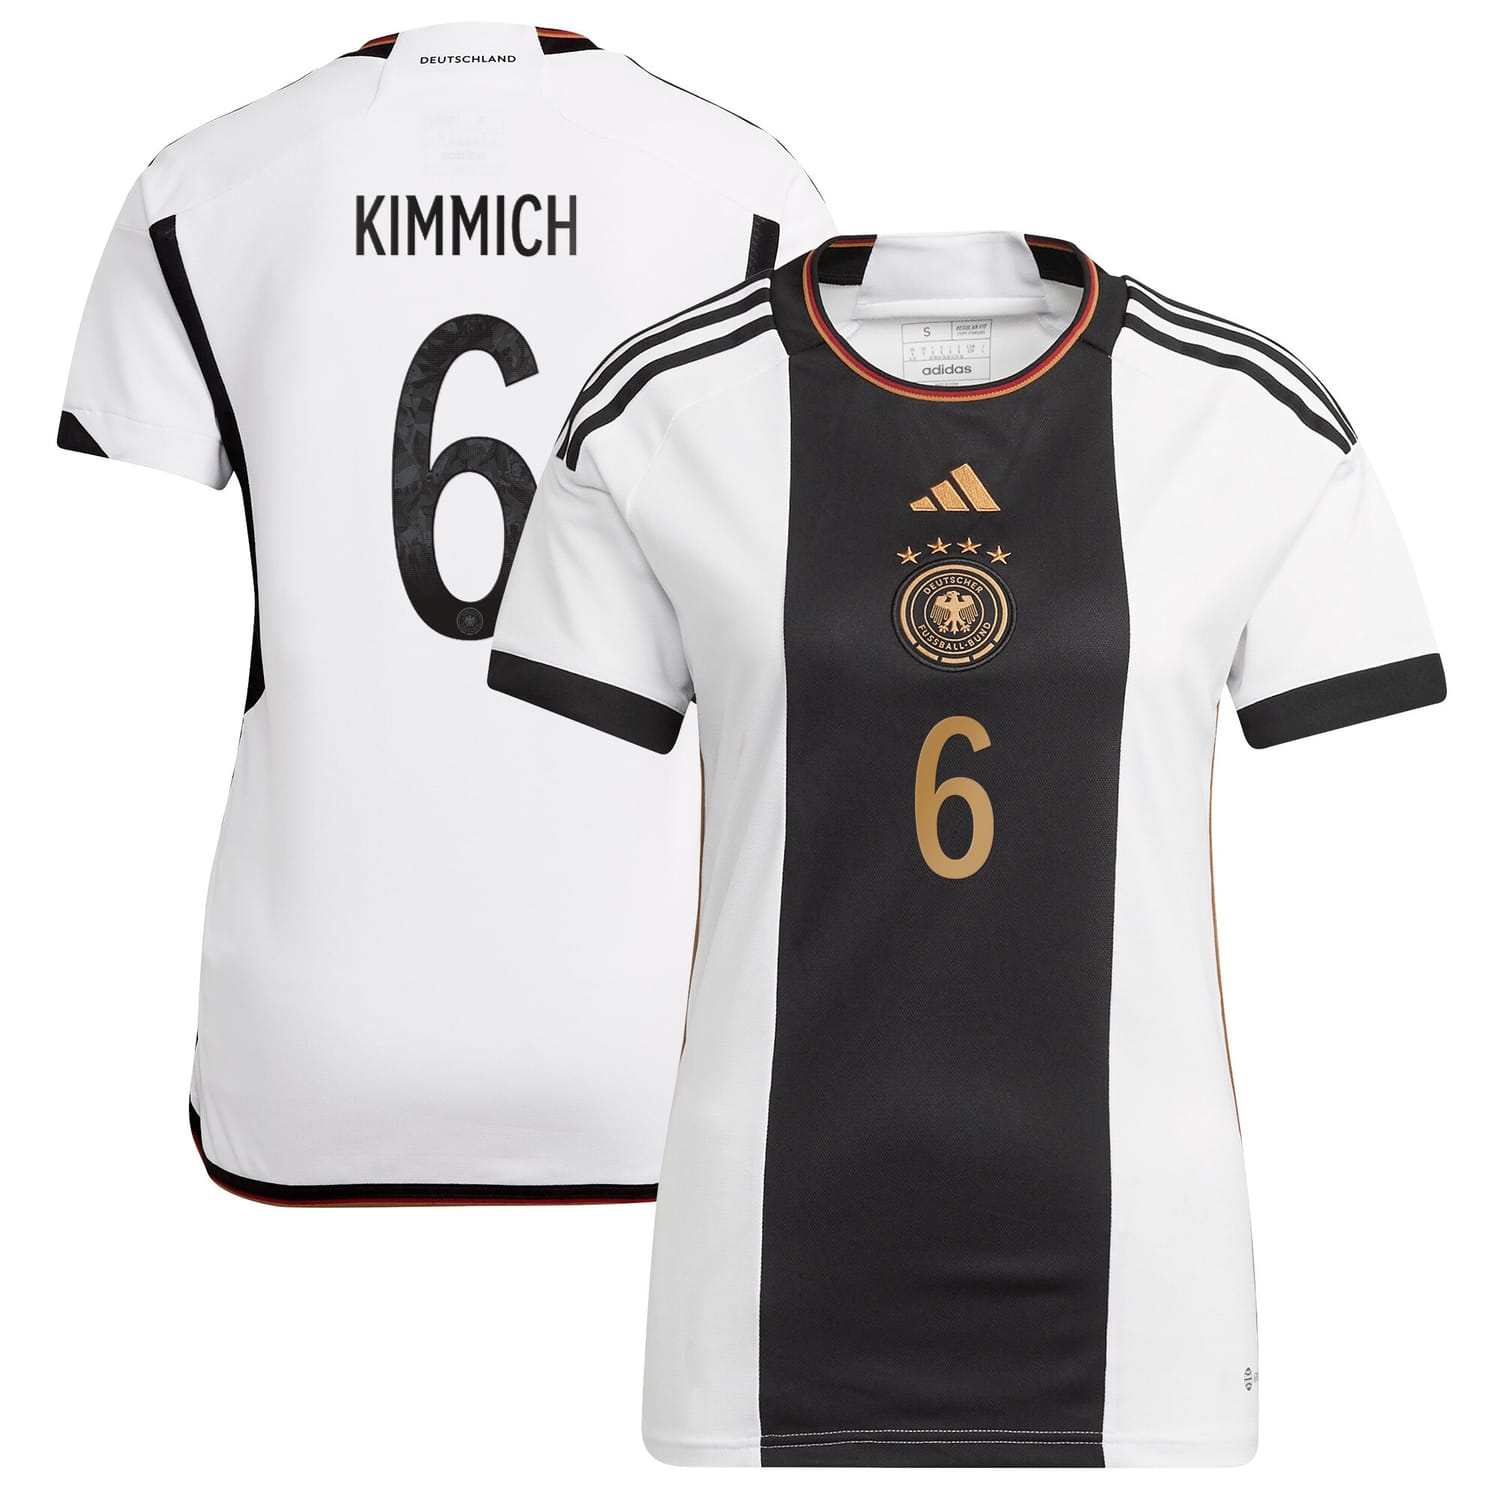 Germany National Team Home Jersey Shirt player Joshua Kimmich 6 printing for Women